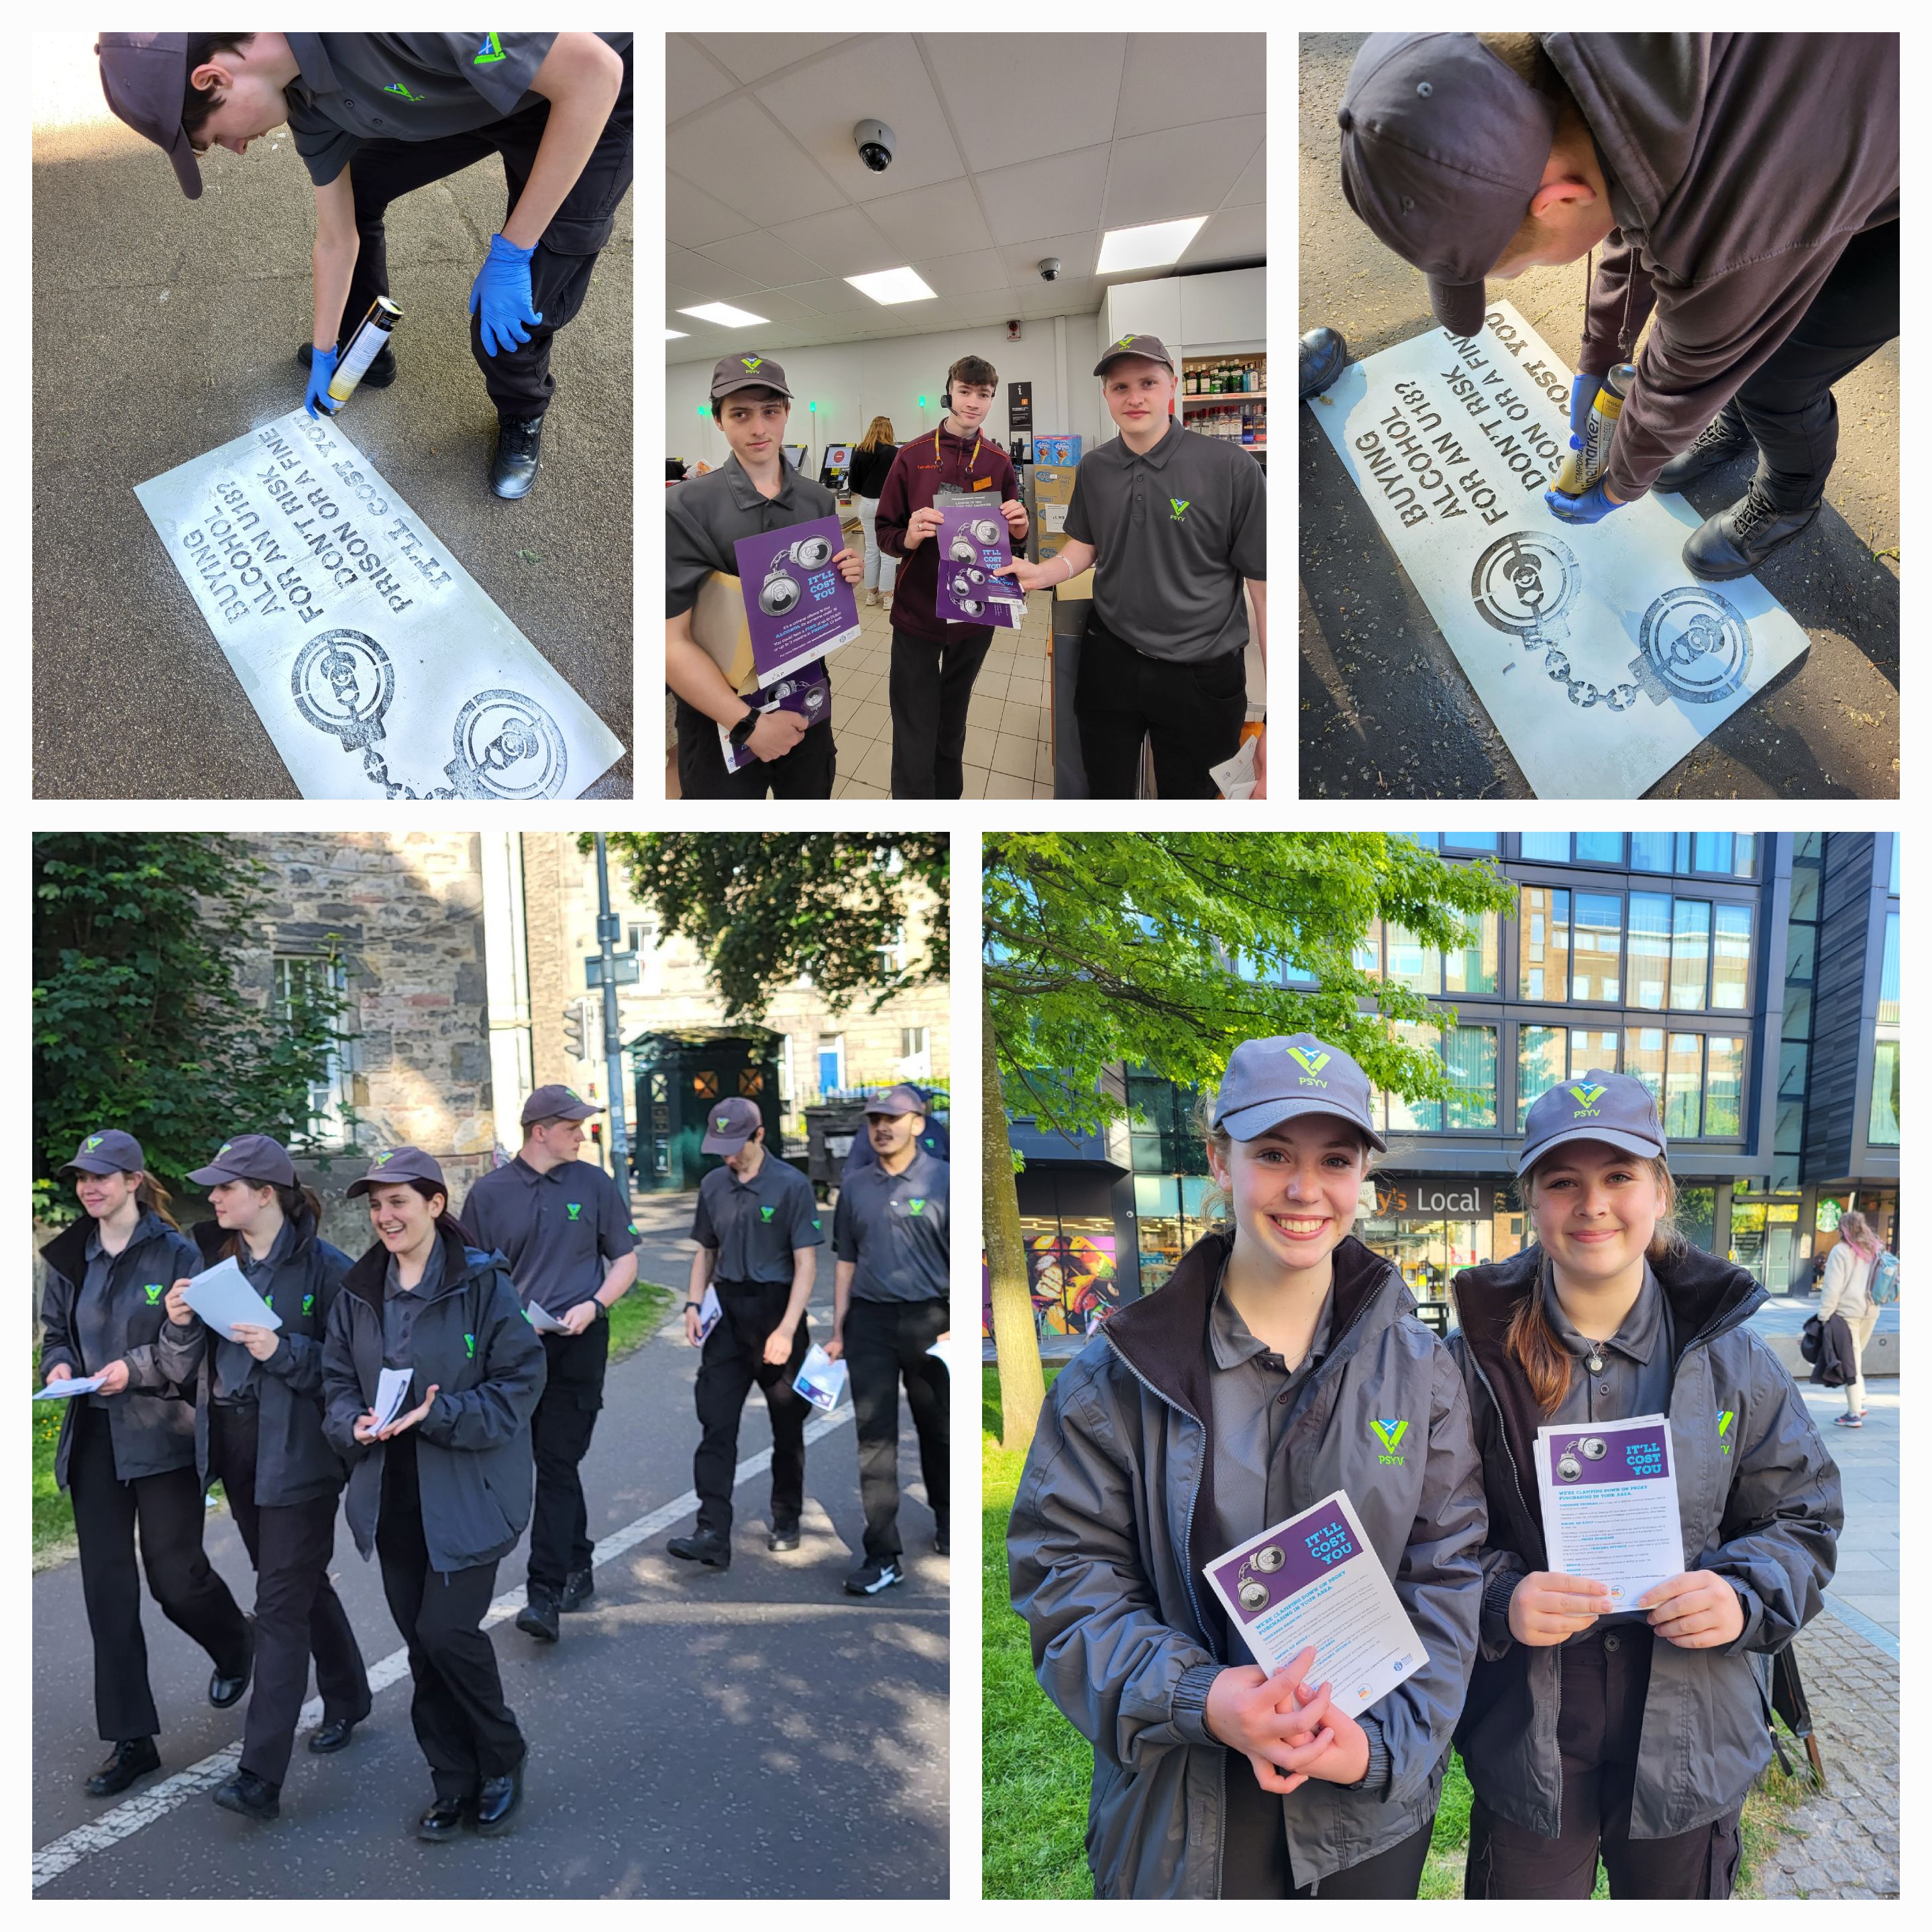 5 photos of police youth volunteers with campaign material and pavement stencils.